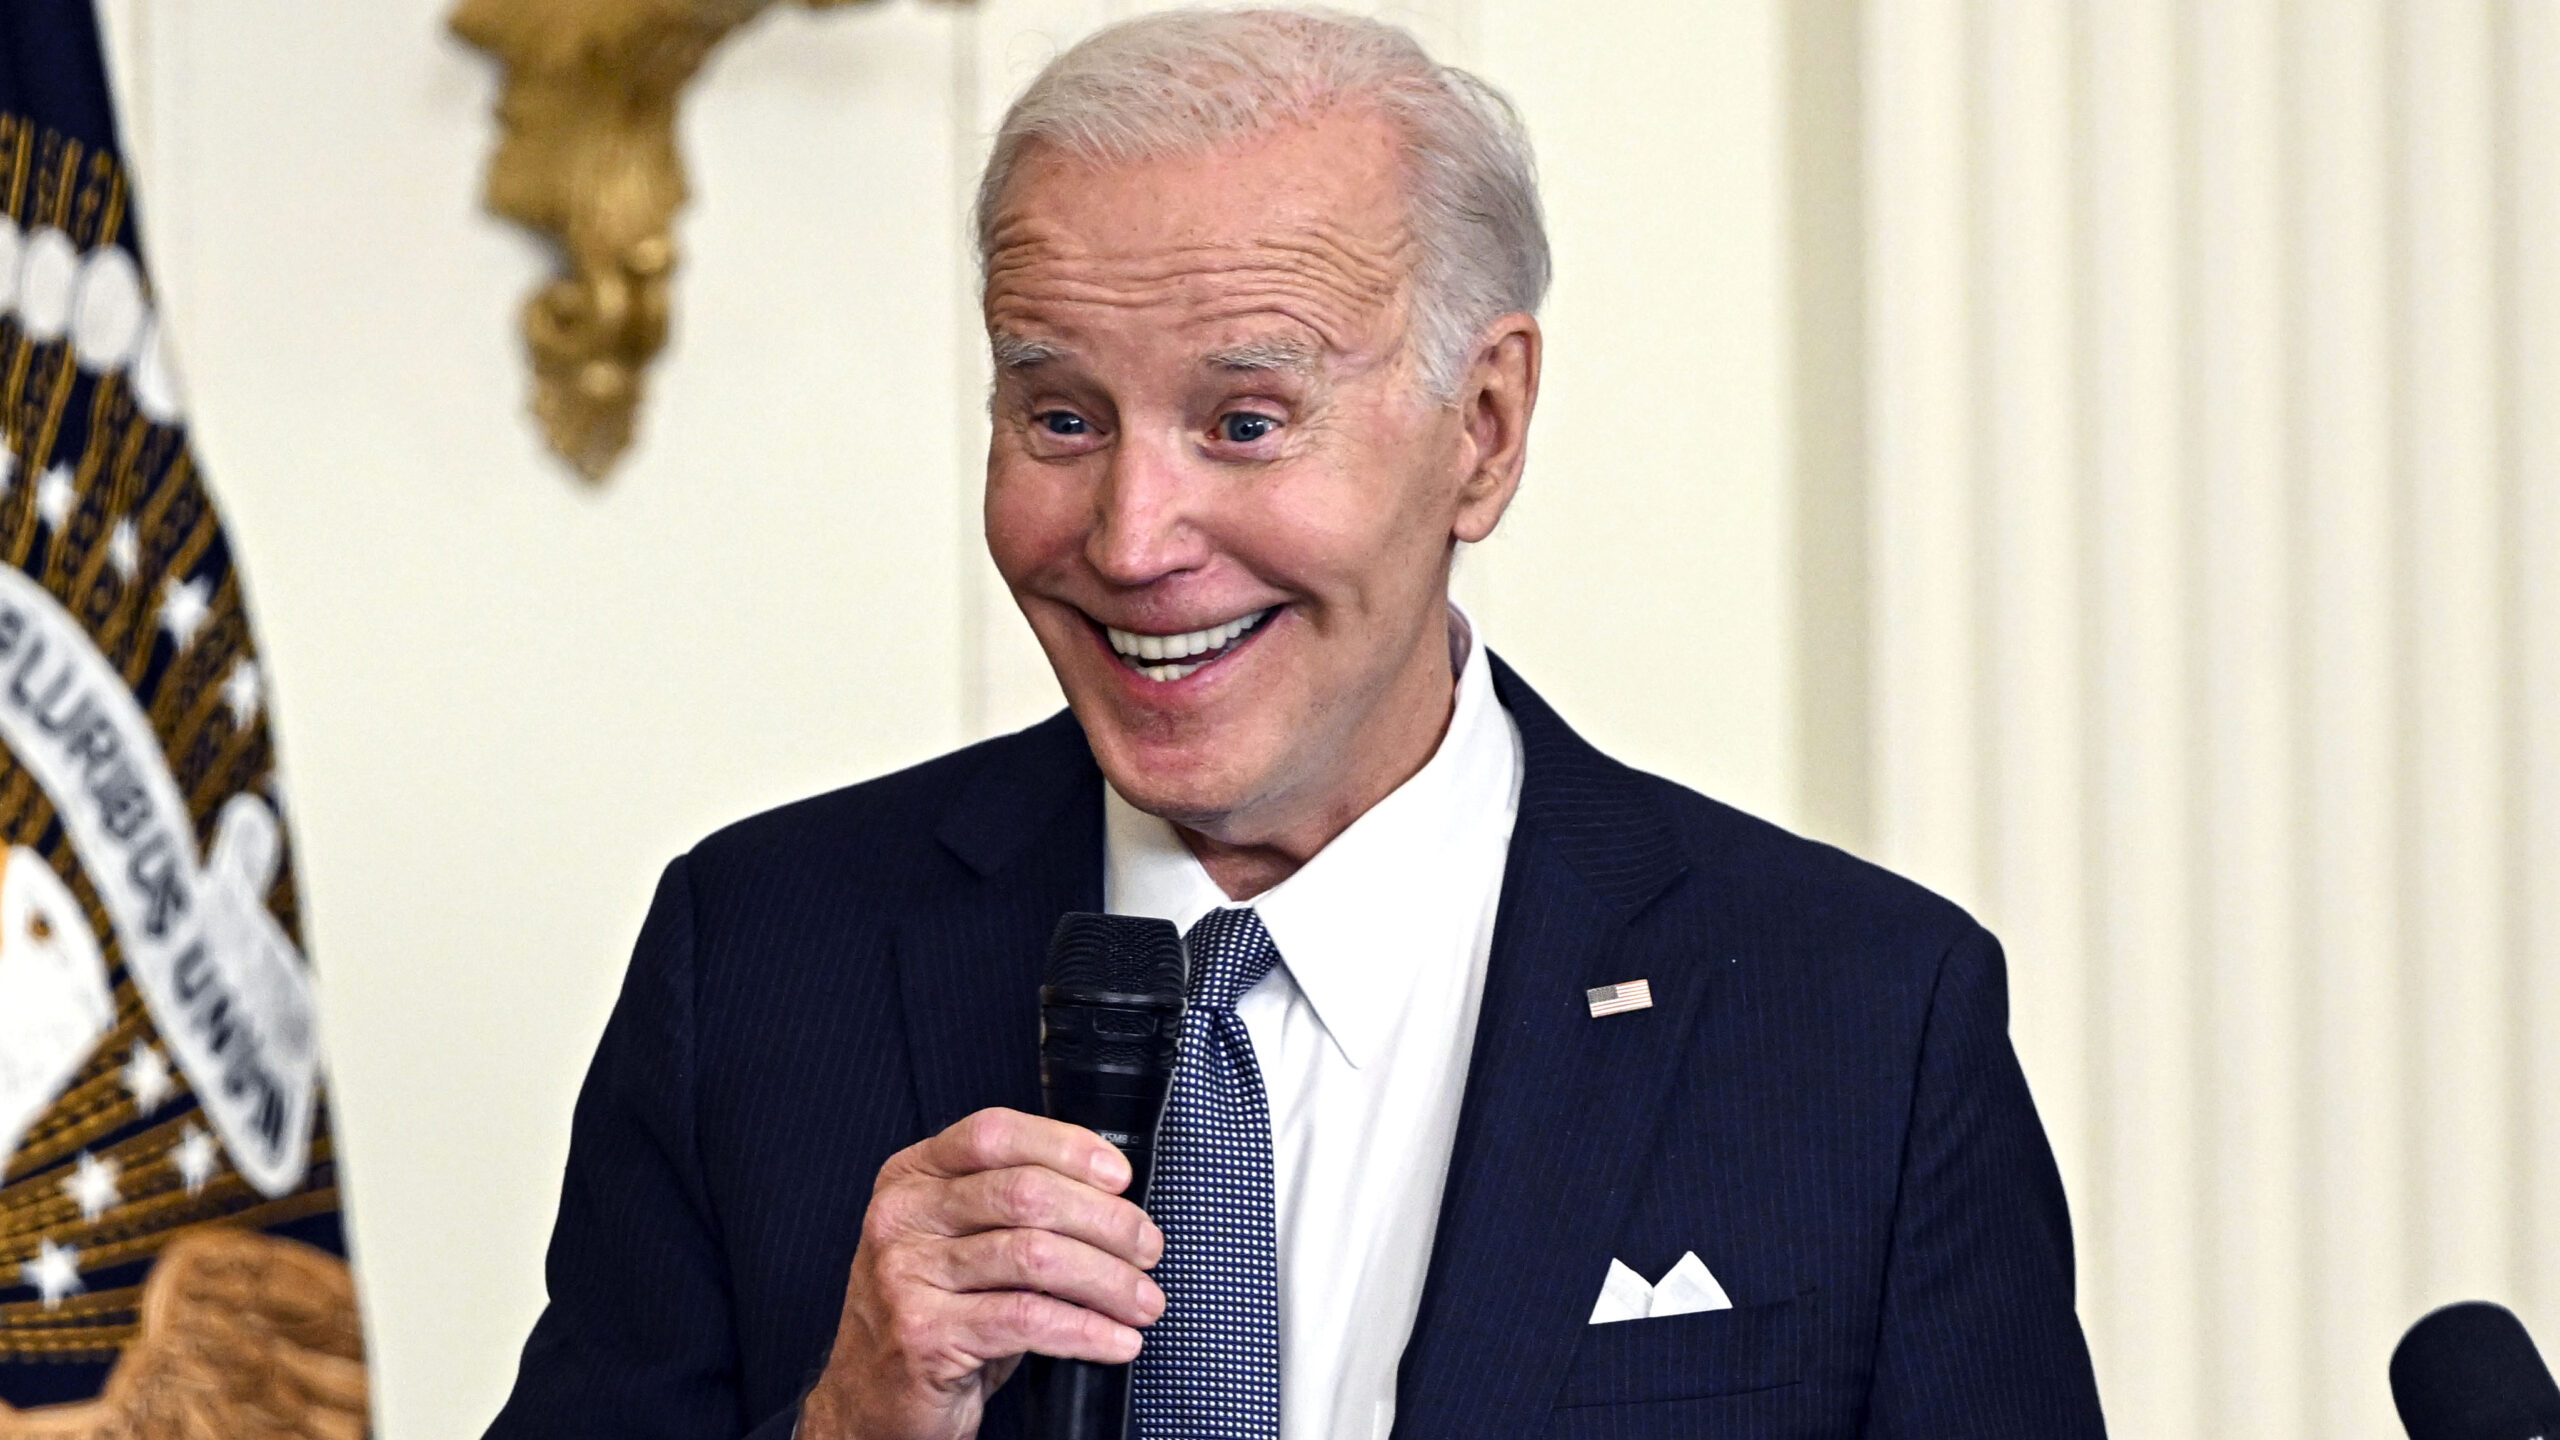 Biden angrily responds to reporter’s question on bribery scandal.